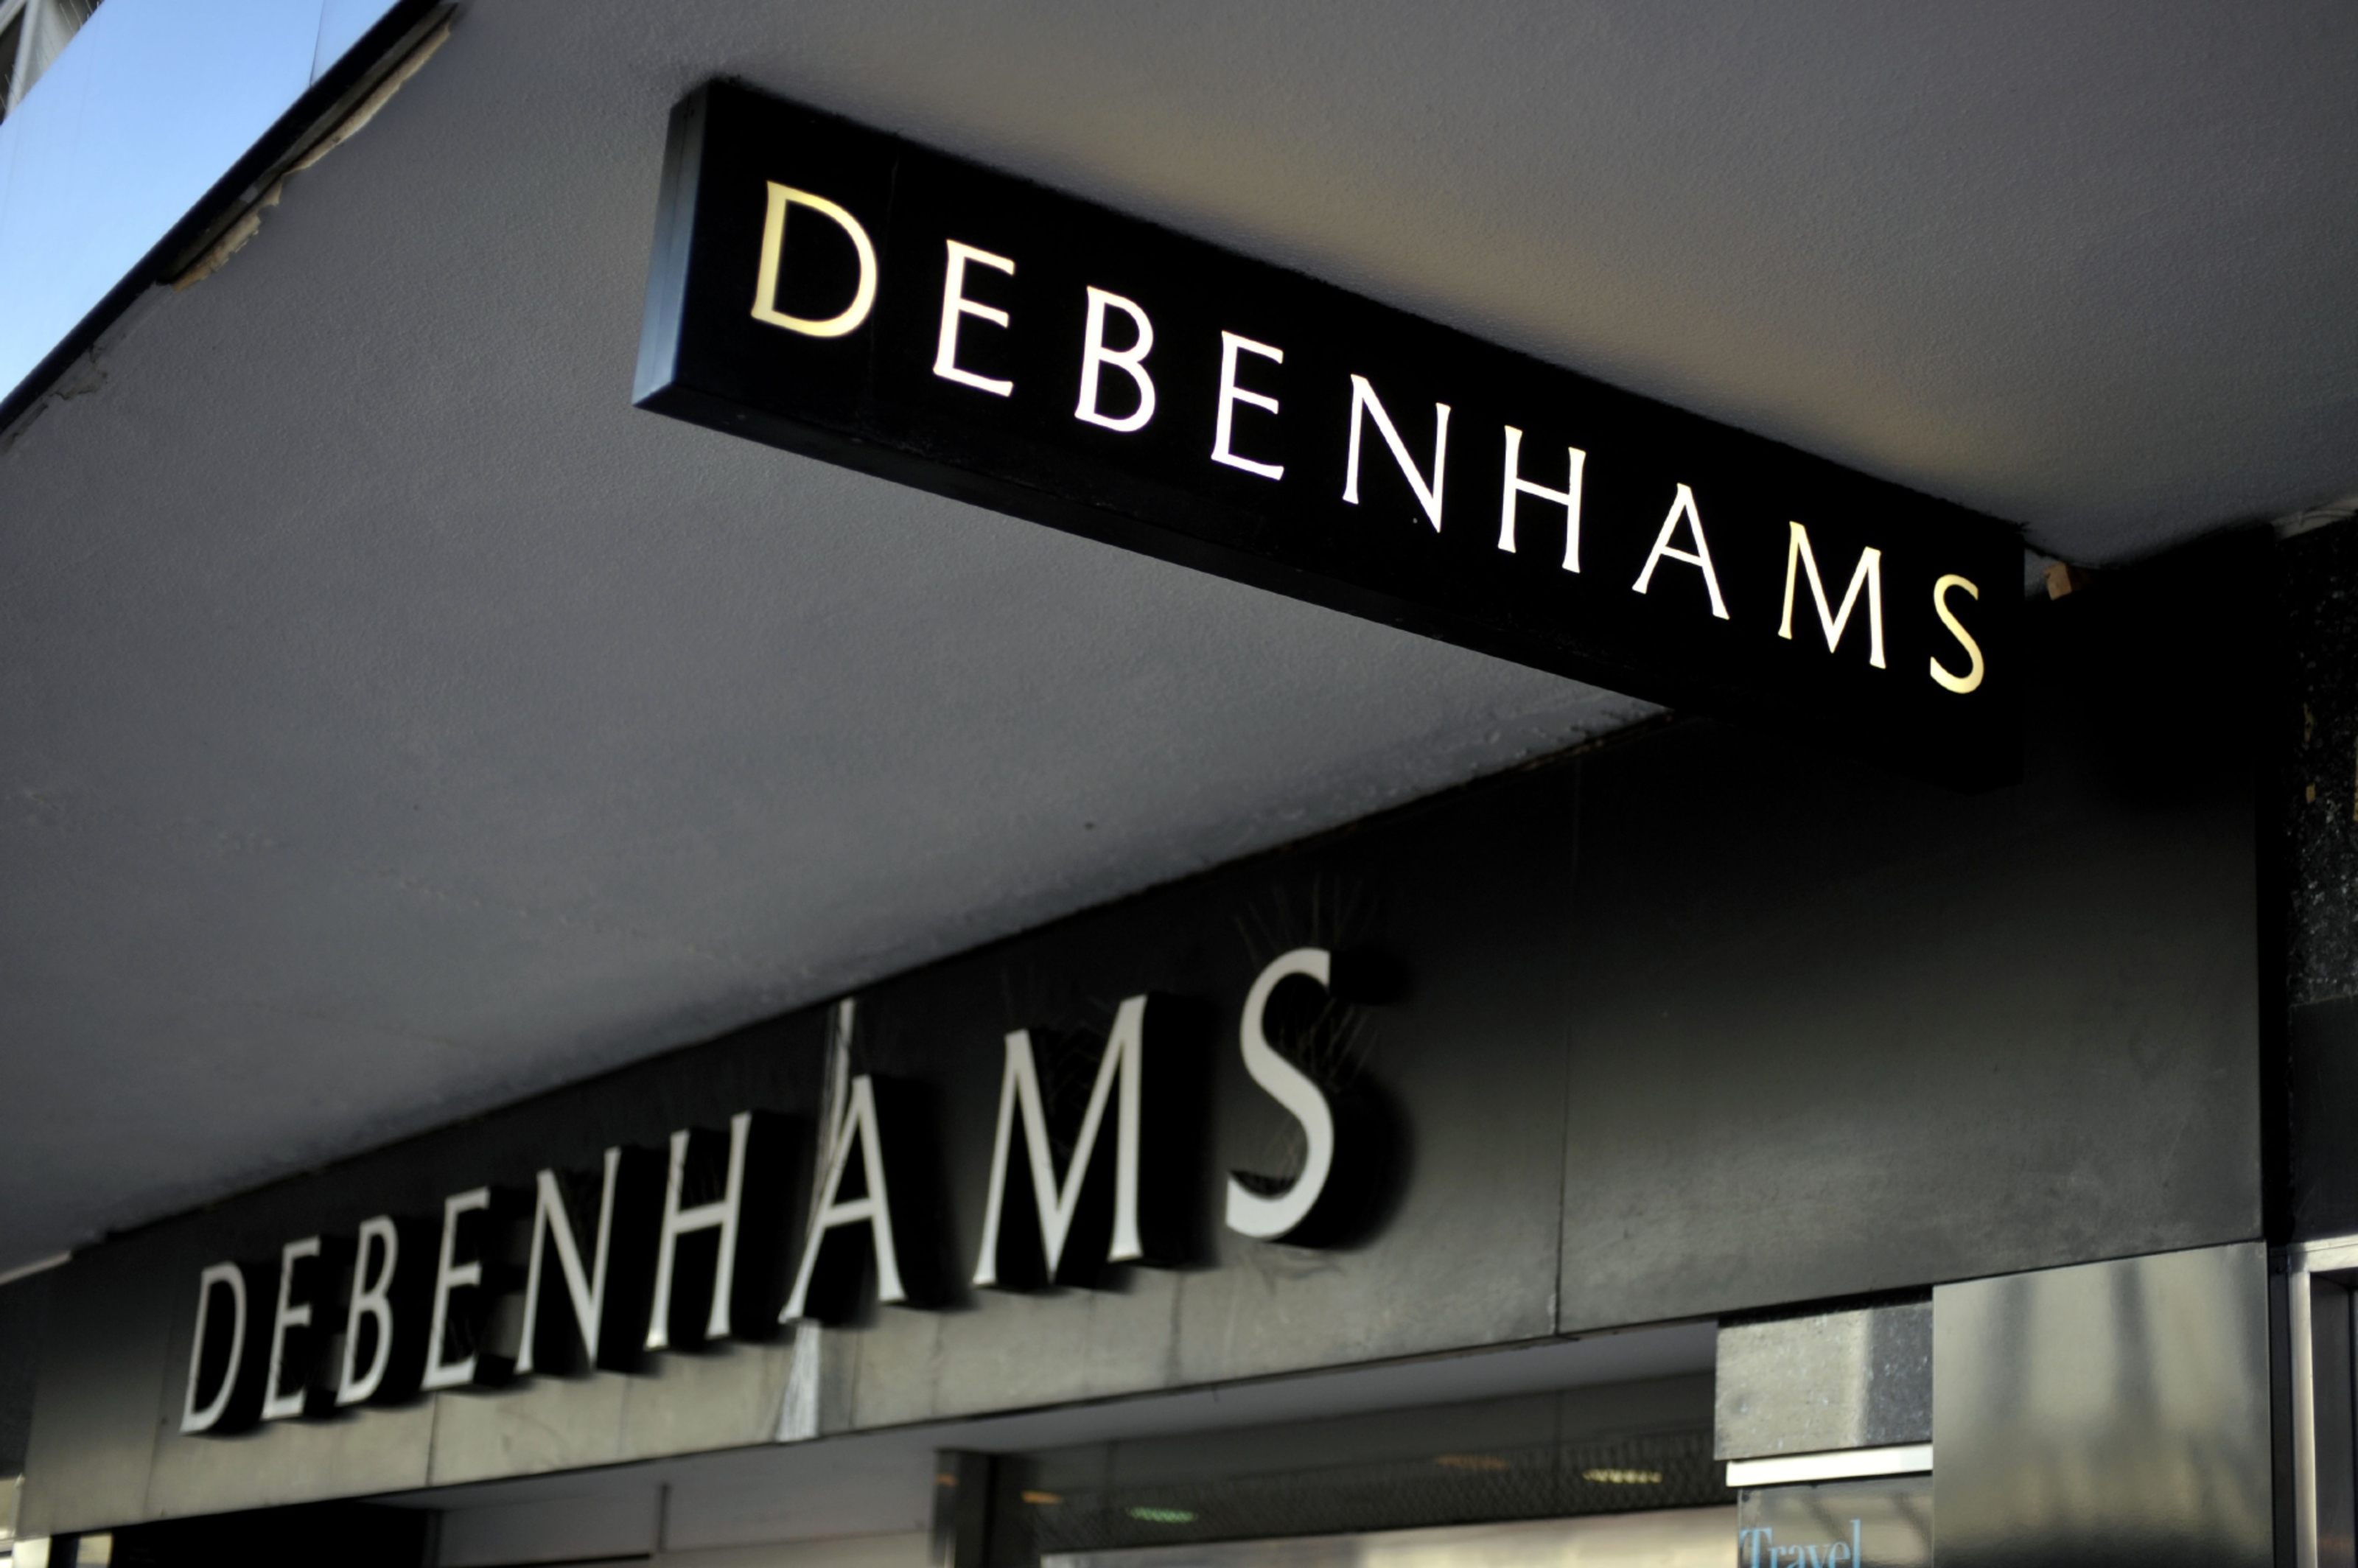 Debenhams
General view of a Debenhams store in Swindon, Wiltshire. PRESS ASSCOCIATION Photo. Picture date: Wednesday January 9, 2012. Photo credit should read: Tim Ireland/PA Wire